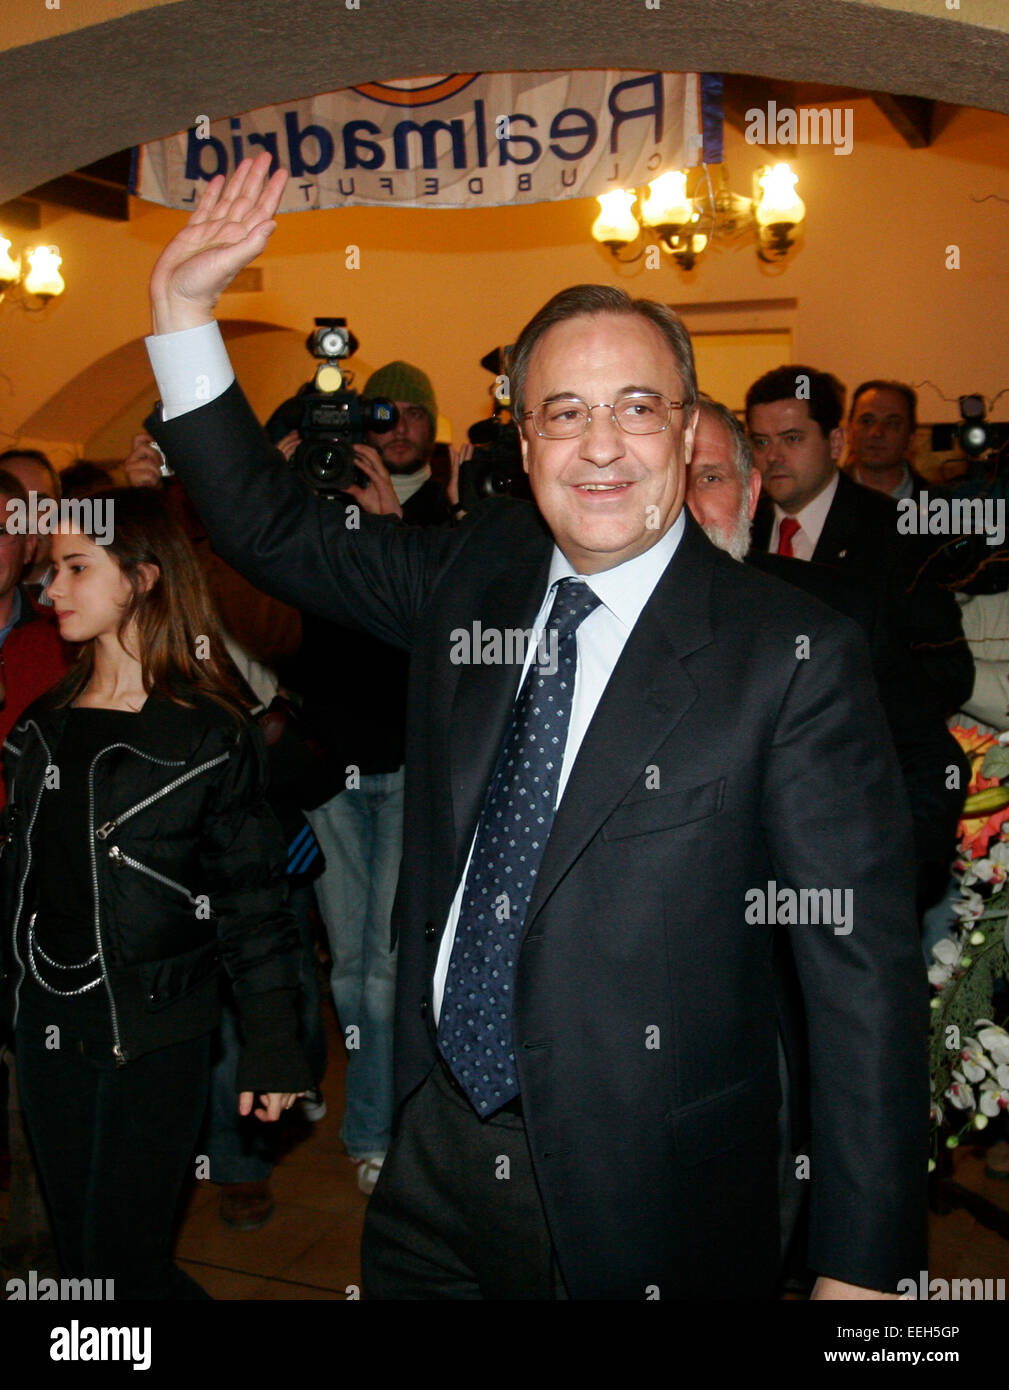 Real Madrid soccer team President and chairman Florentino Perez waves as he arrives to a supporters meet in Majorca. Stock Photo